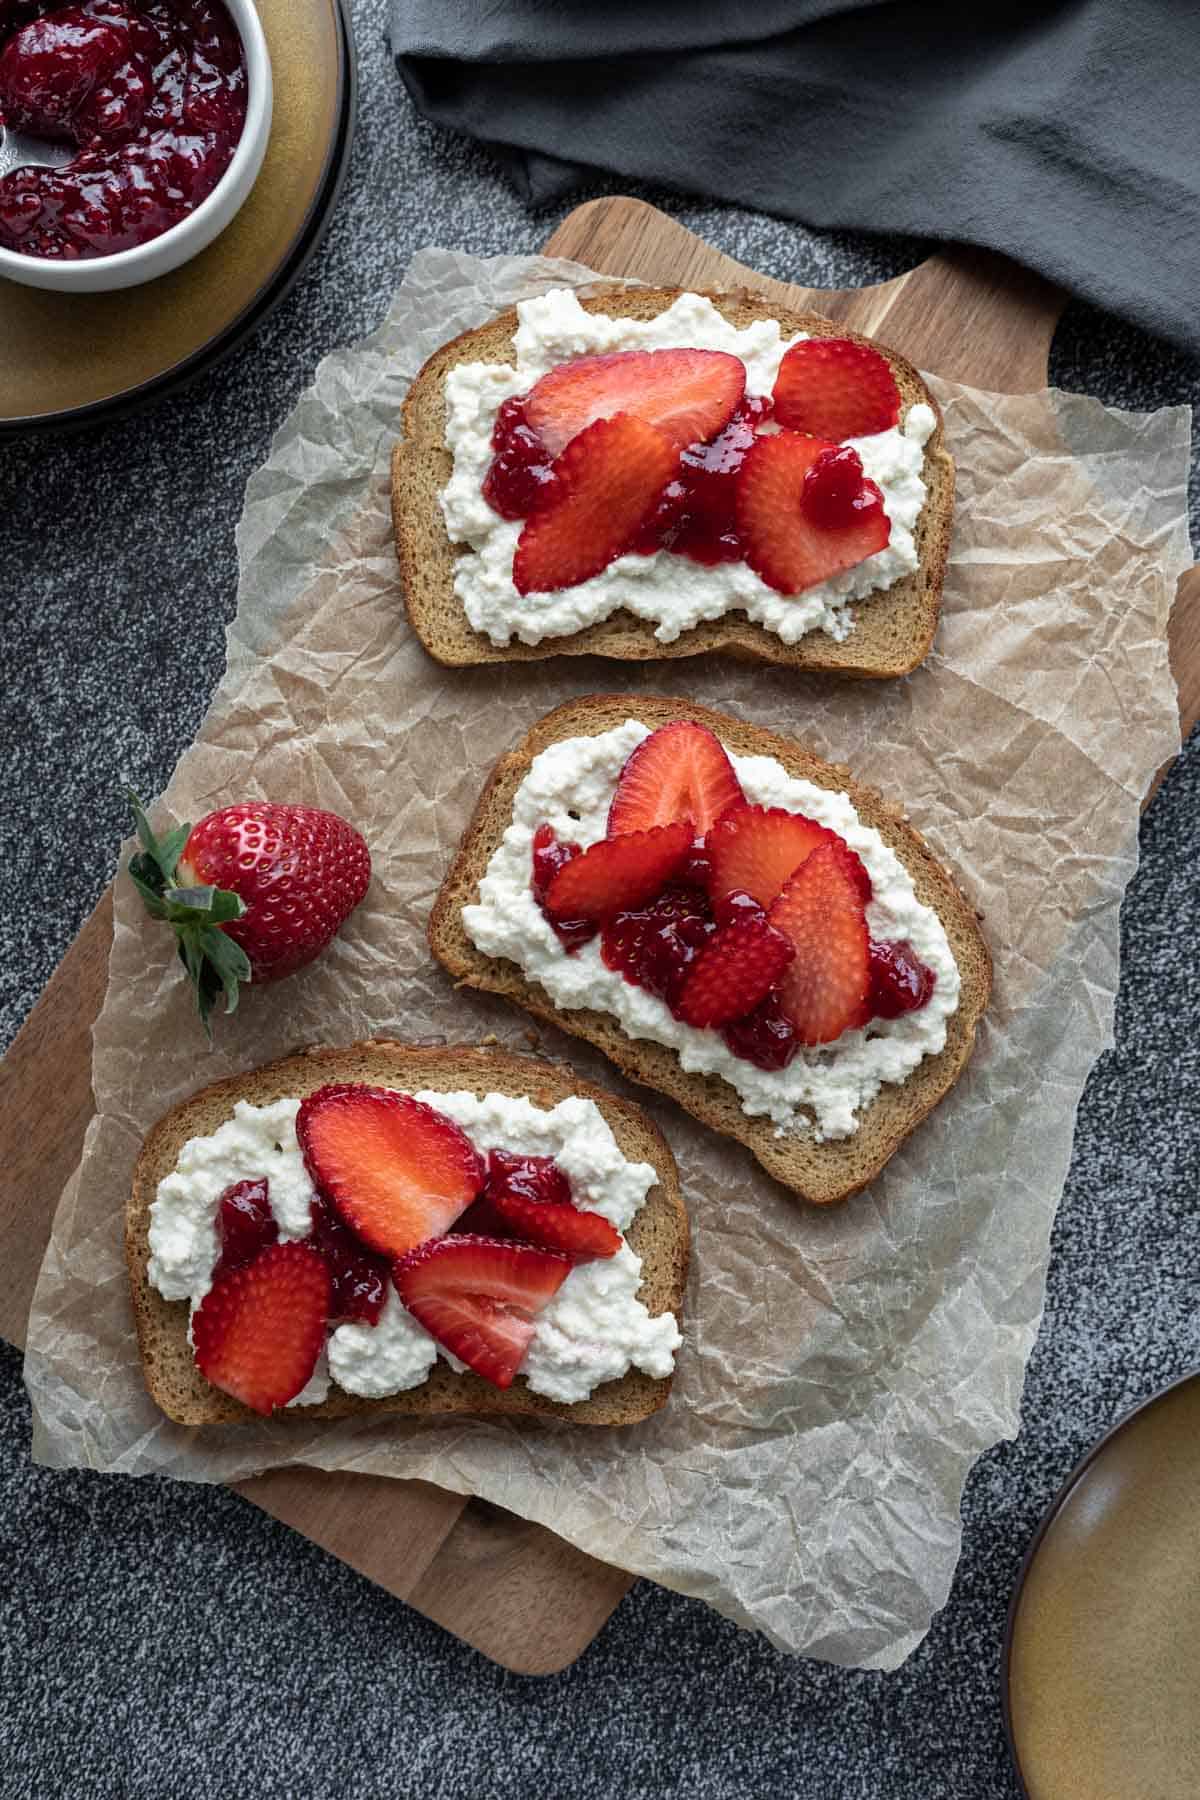 3 slices of bread topped with vegan cottage cheese, jam, and sliced strawberries.